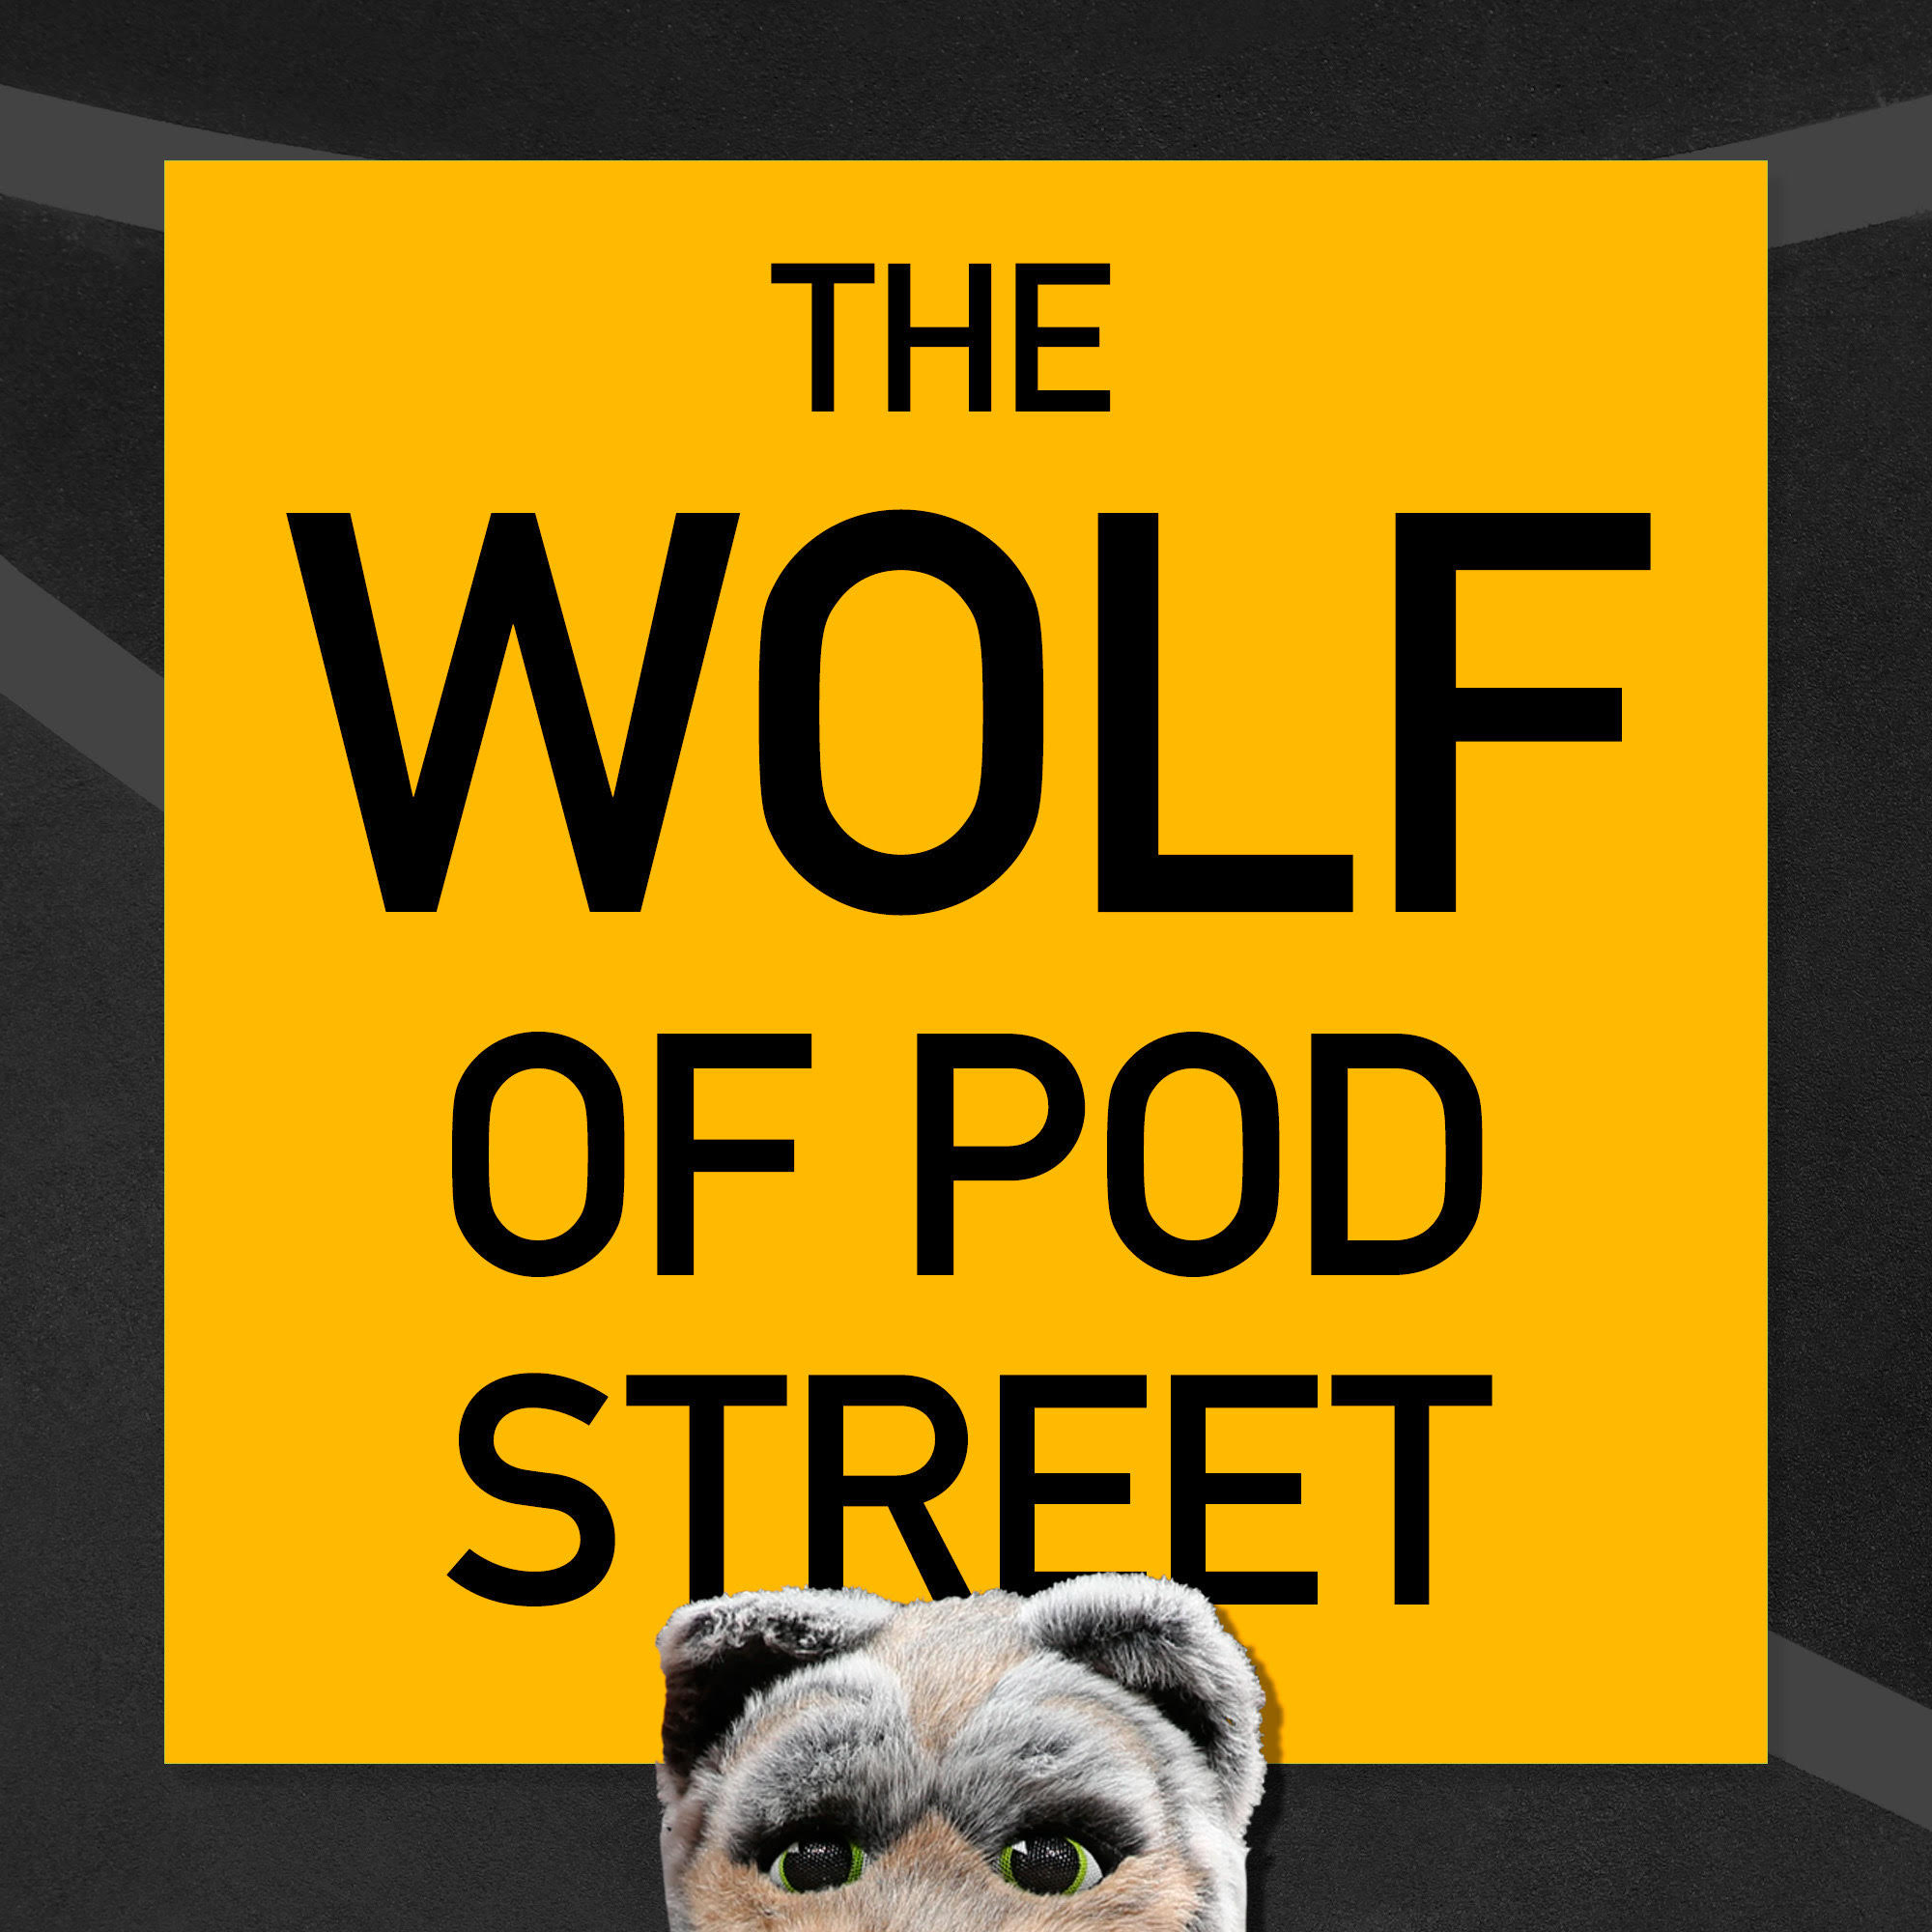 The Wolf of Pod Street